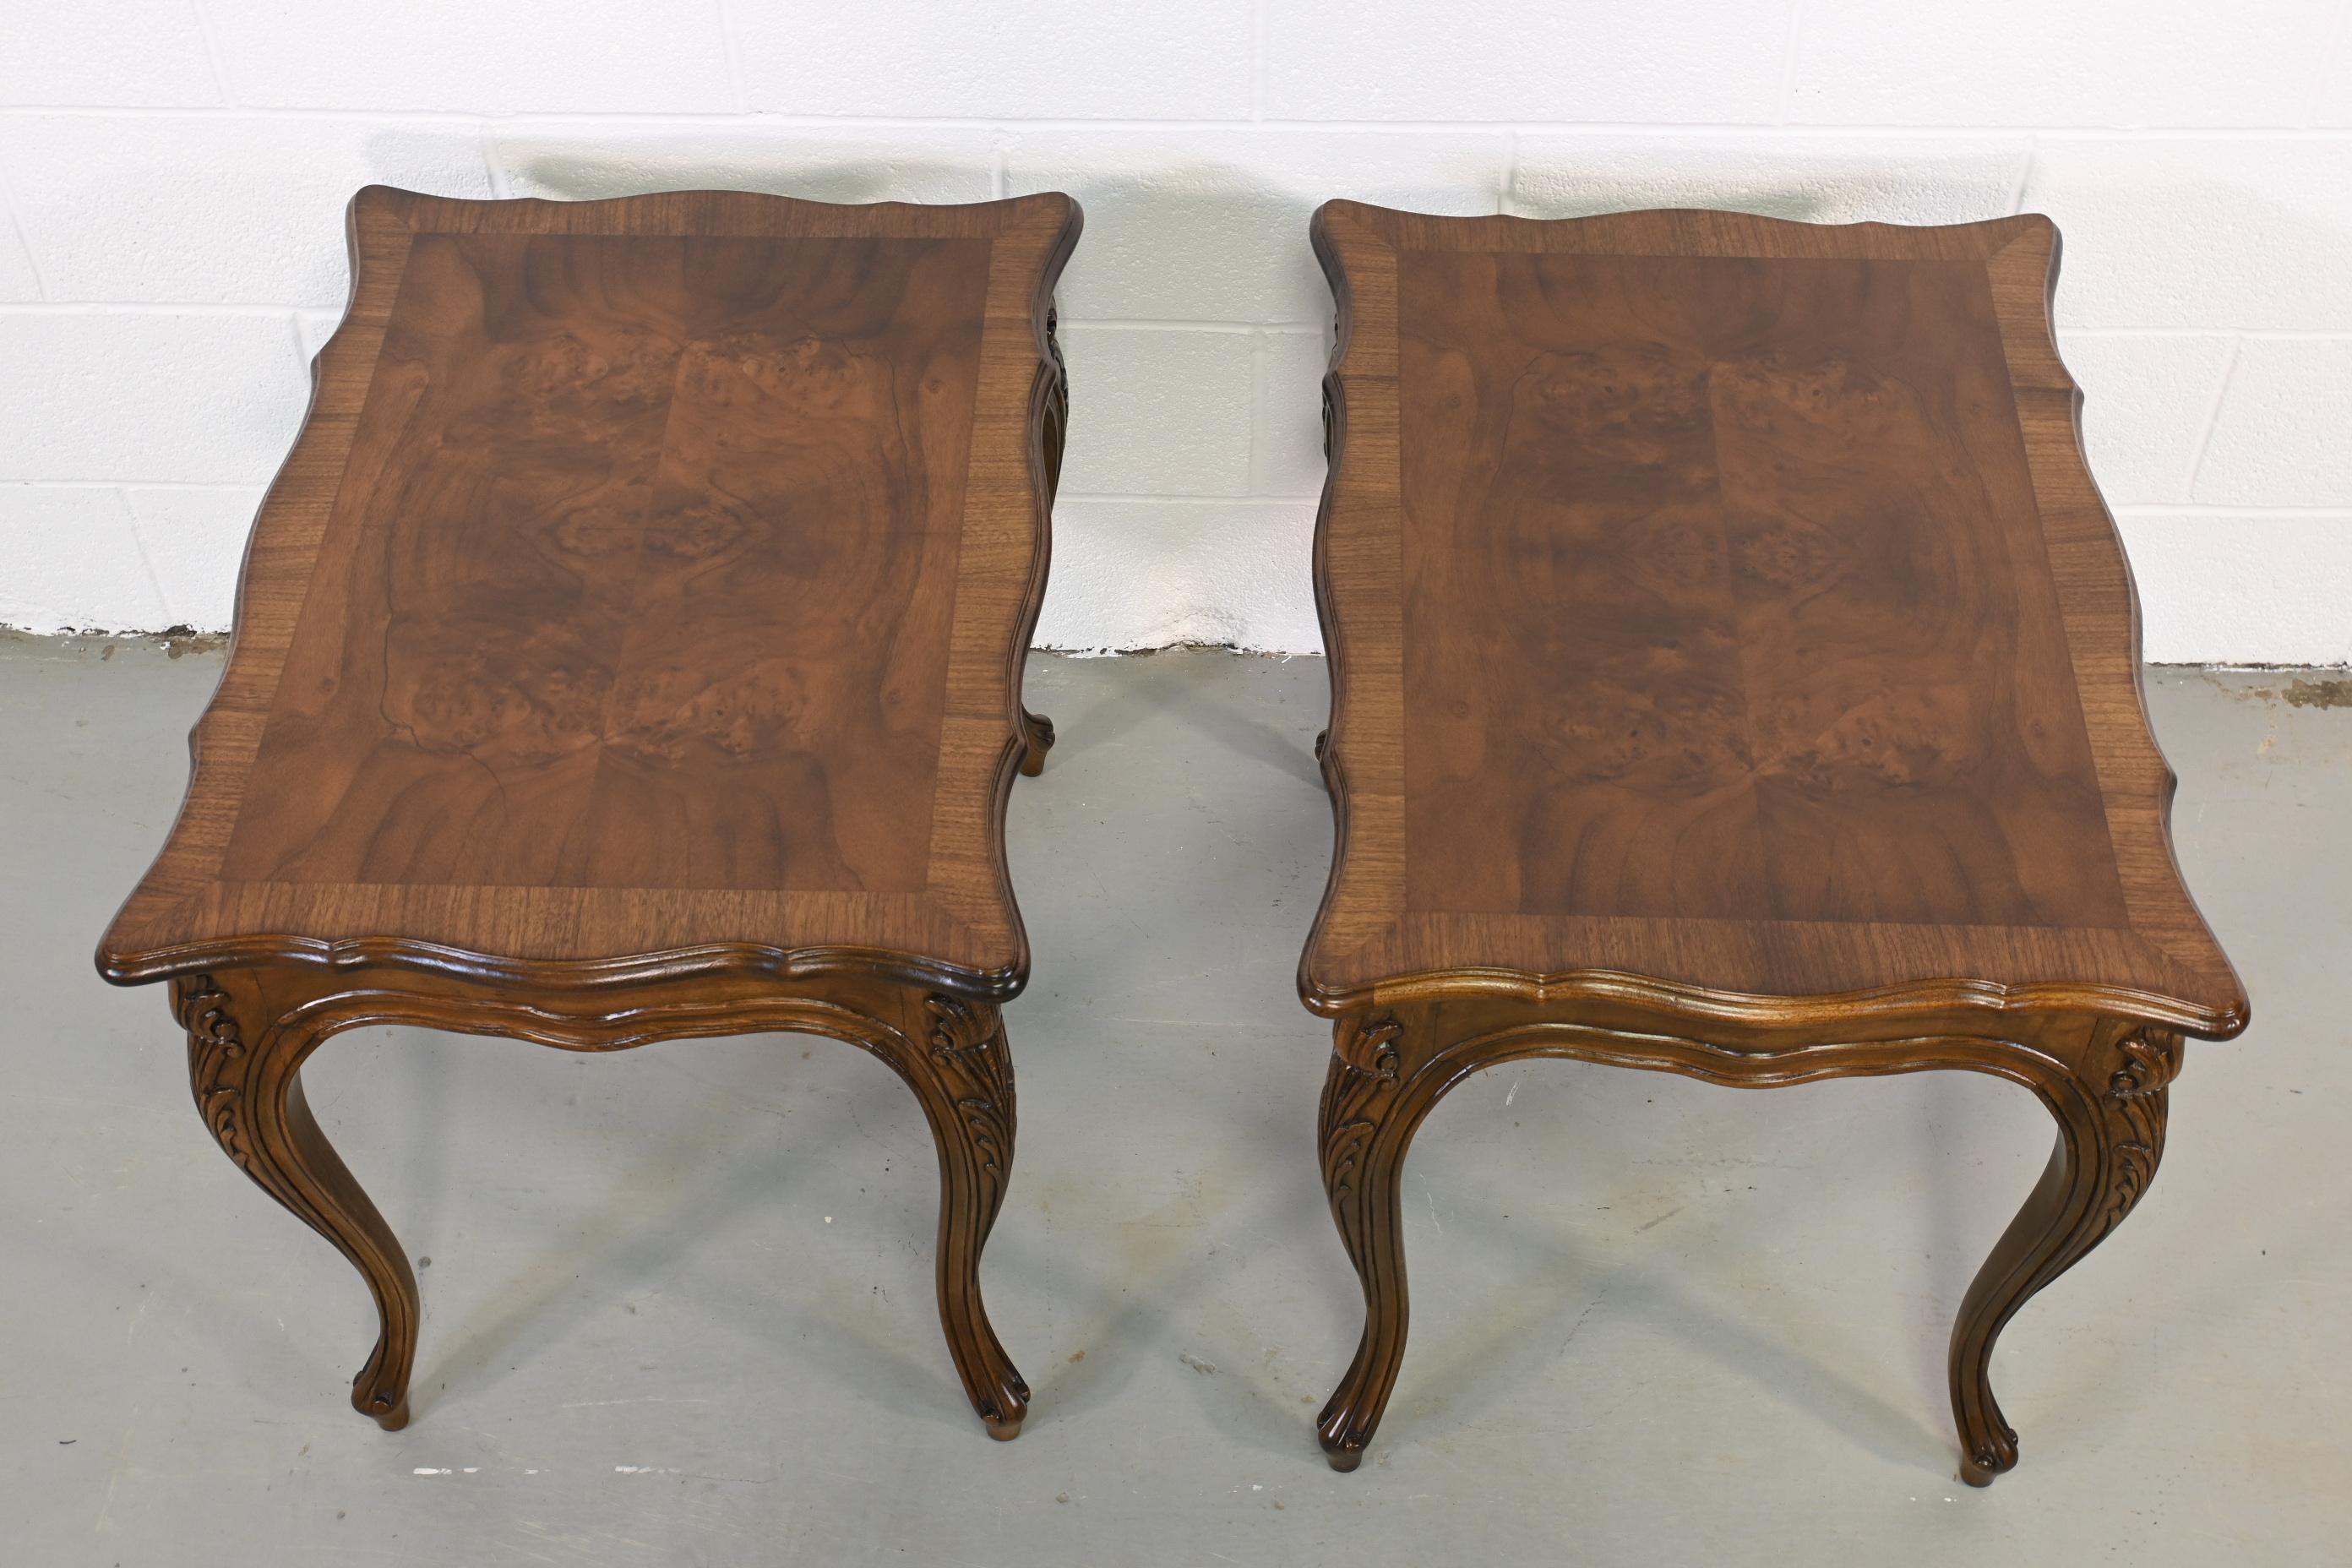 Karges Furniture French Provincial Burled Walnut End Tables - a Pair For Sale 1